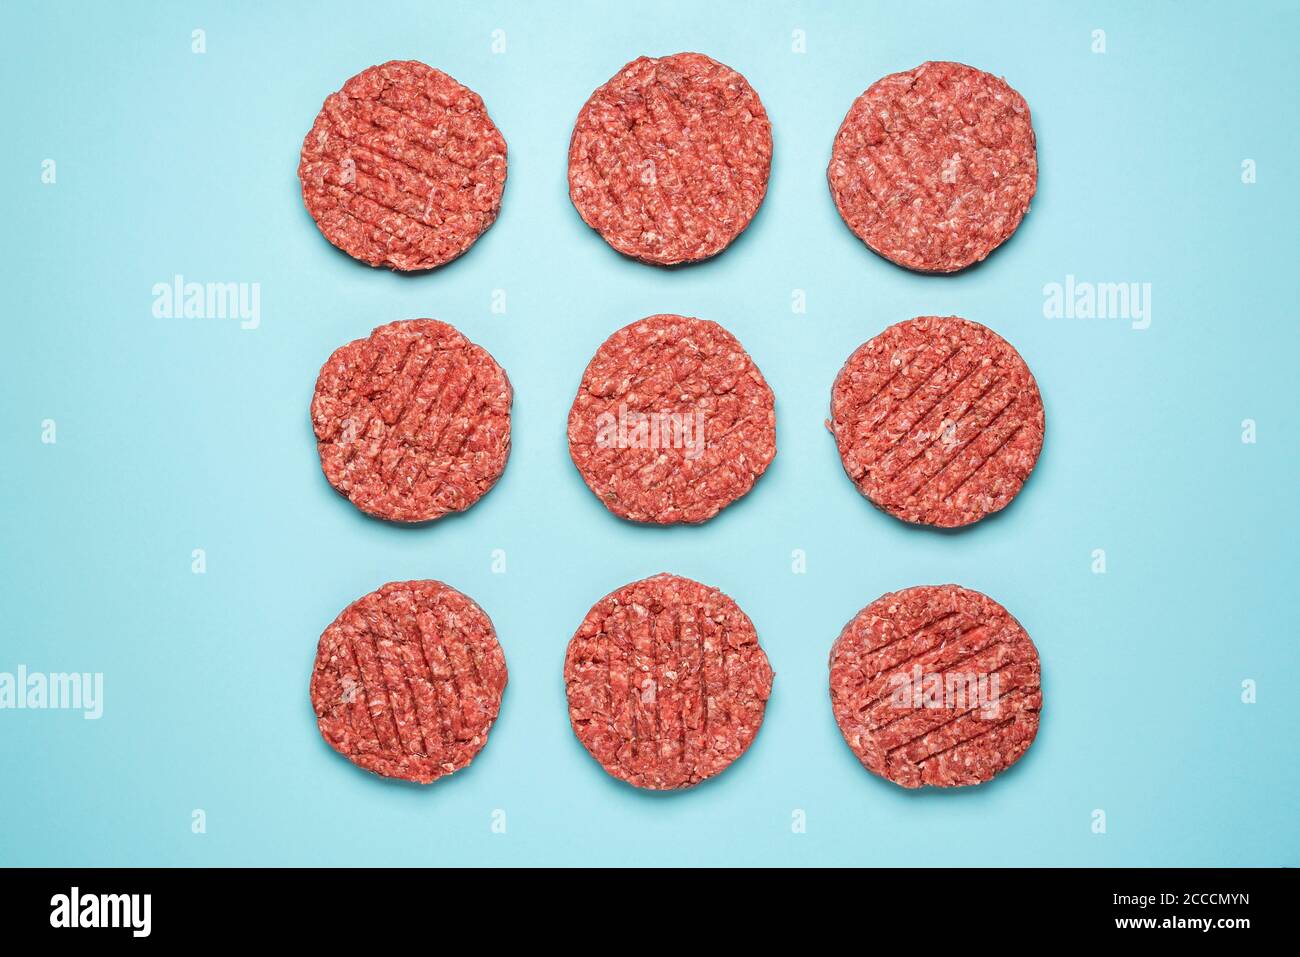 Above view with raw beef patties for burgers,  arranged symmetrically on a blue colored background. Flat lay with nine uncooked burger patties isolate Stock Photo